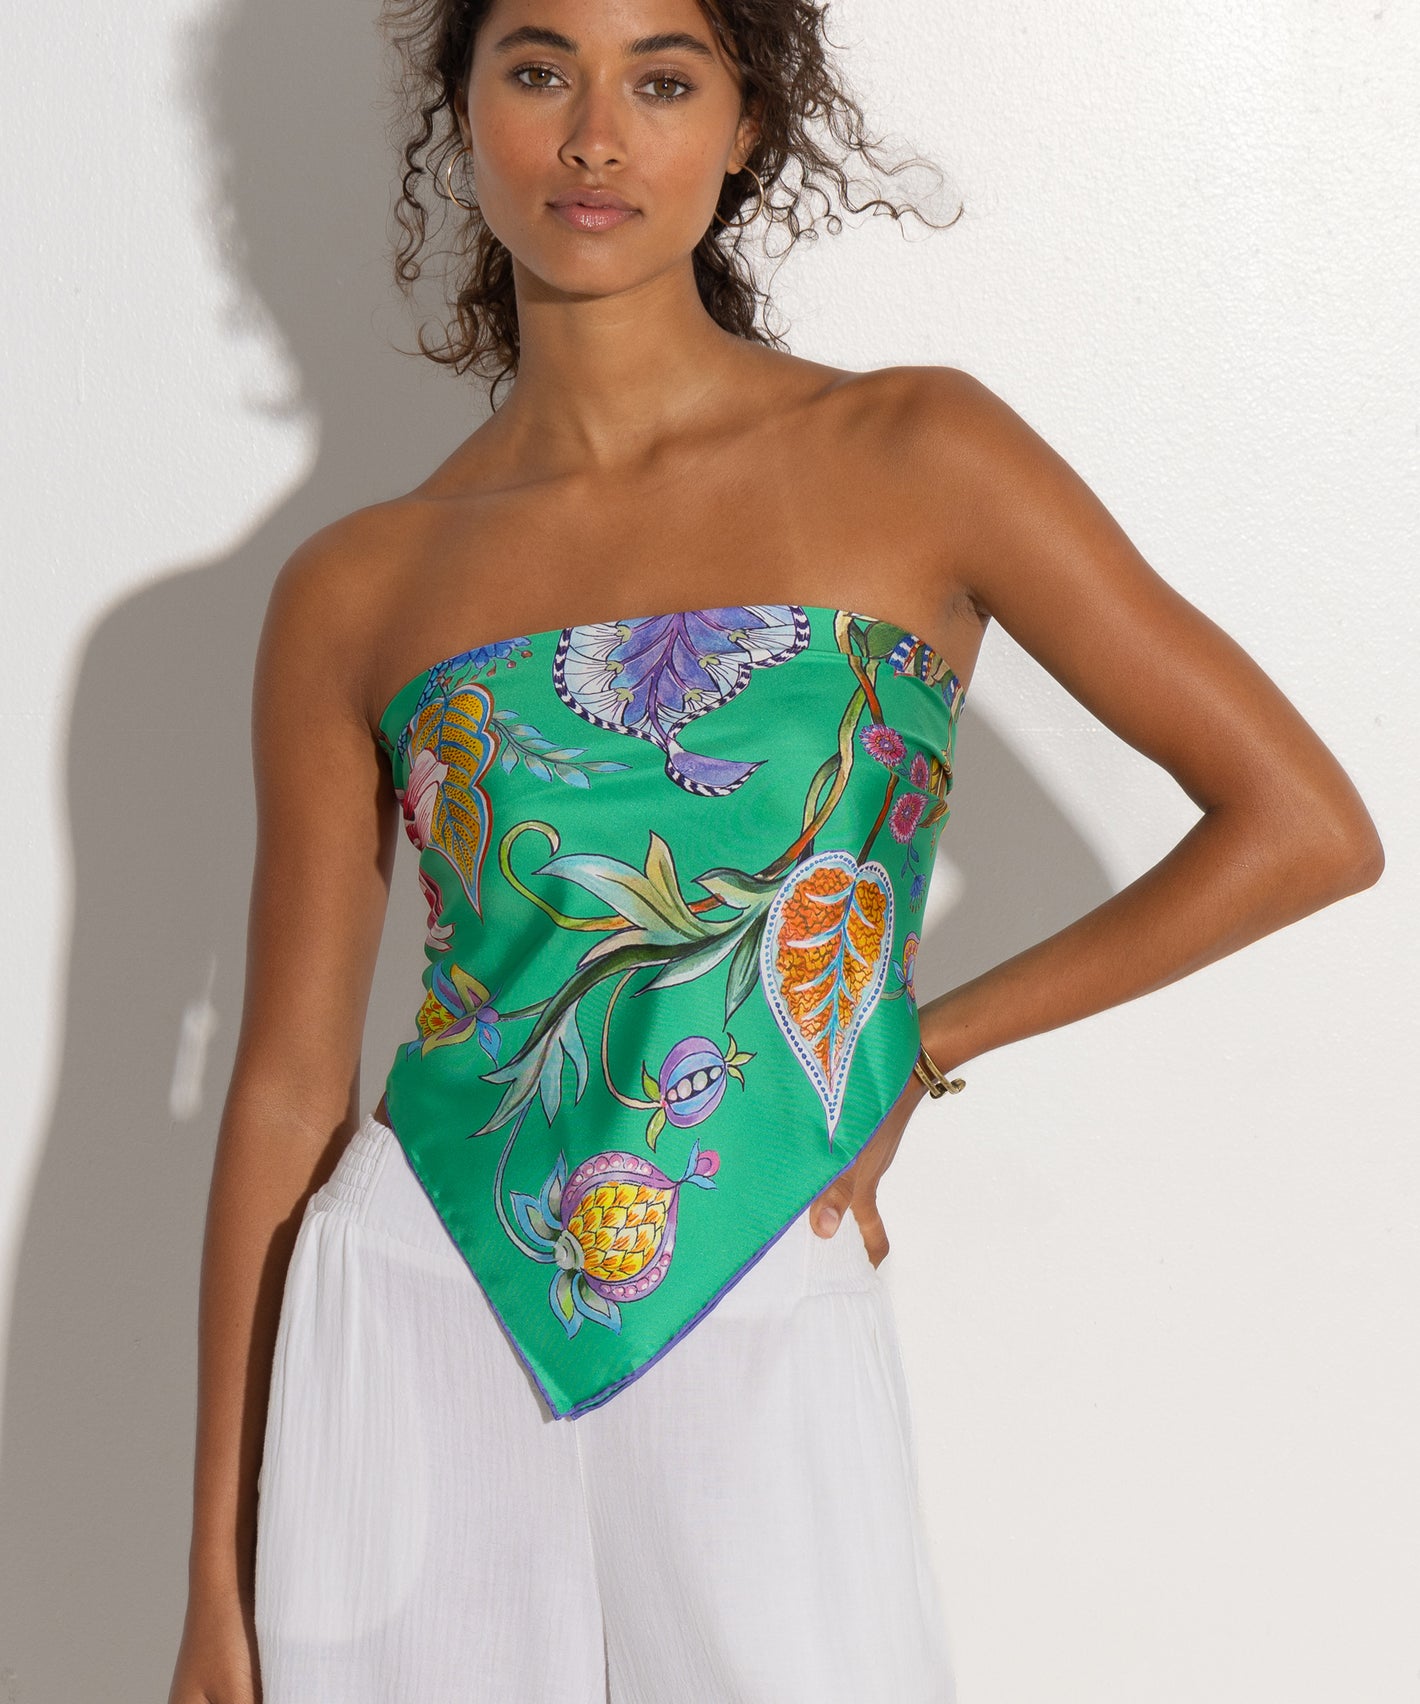 woman wearing sunkissed silk scarf as a top